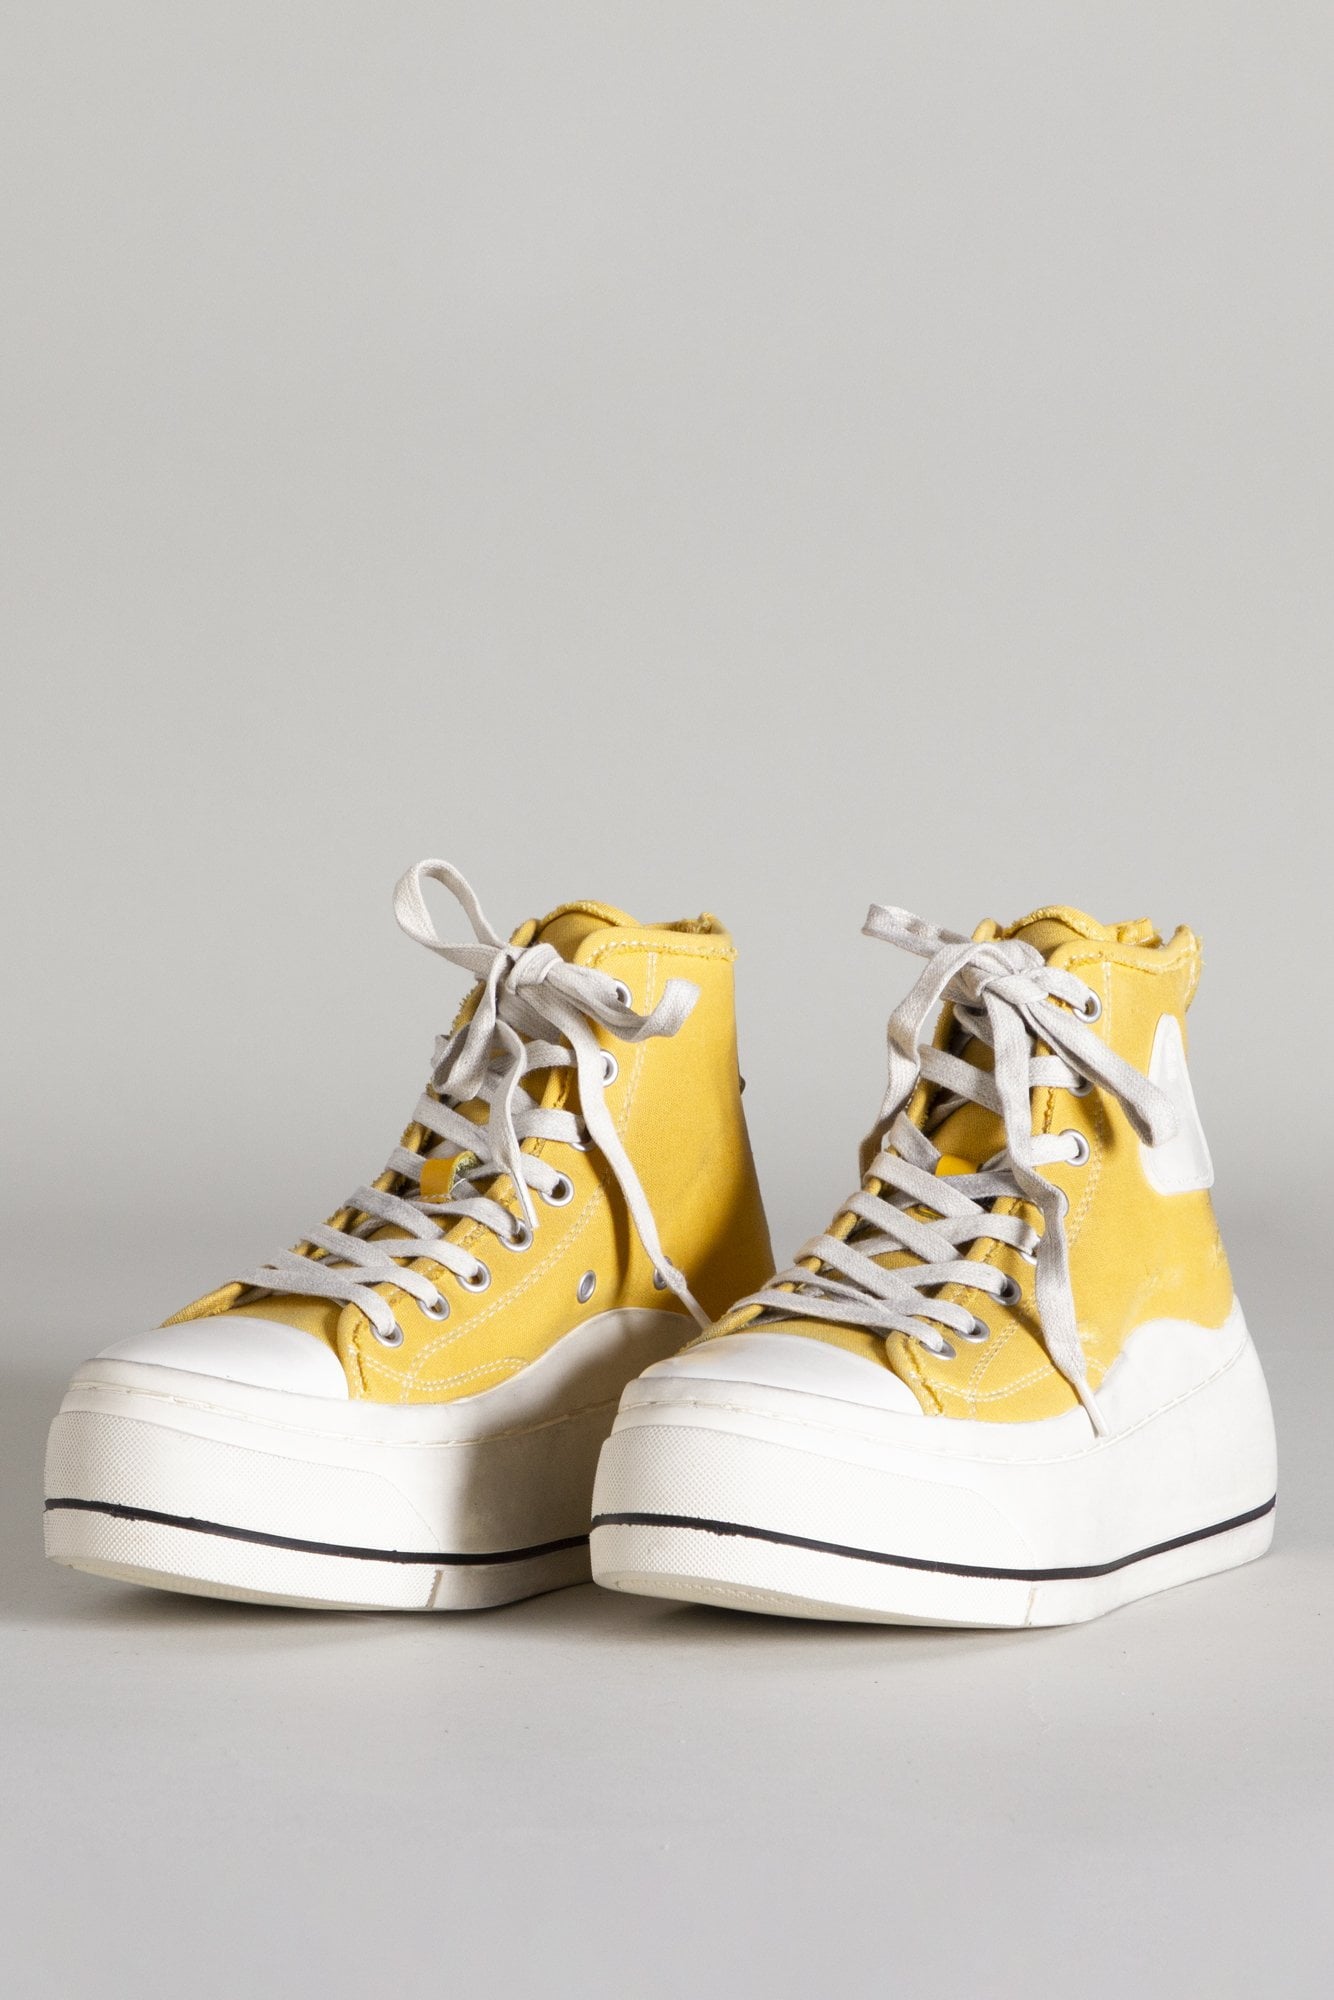 white and gold high top sneakers